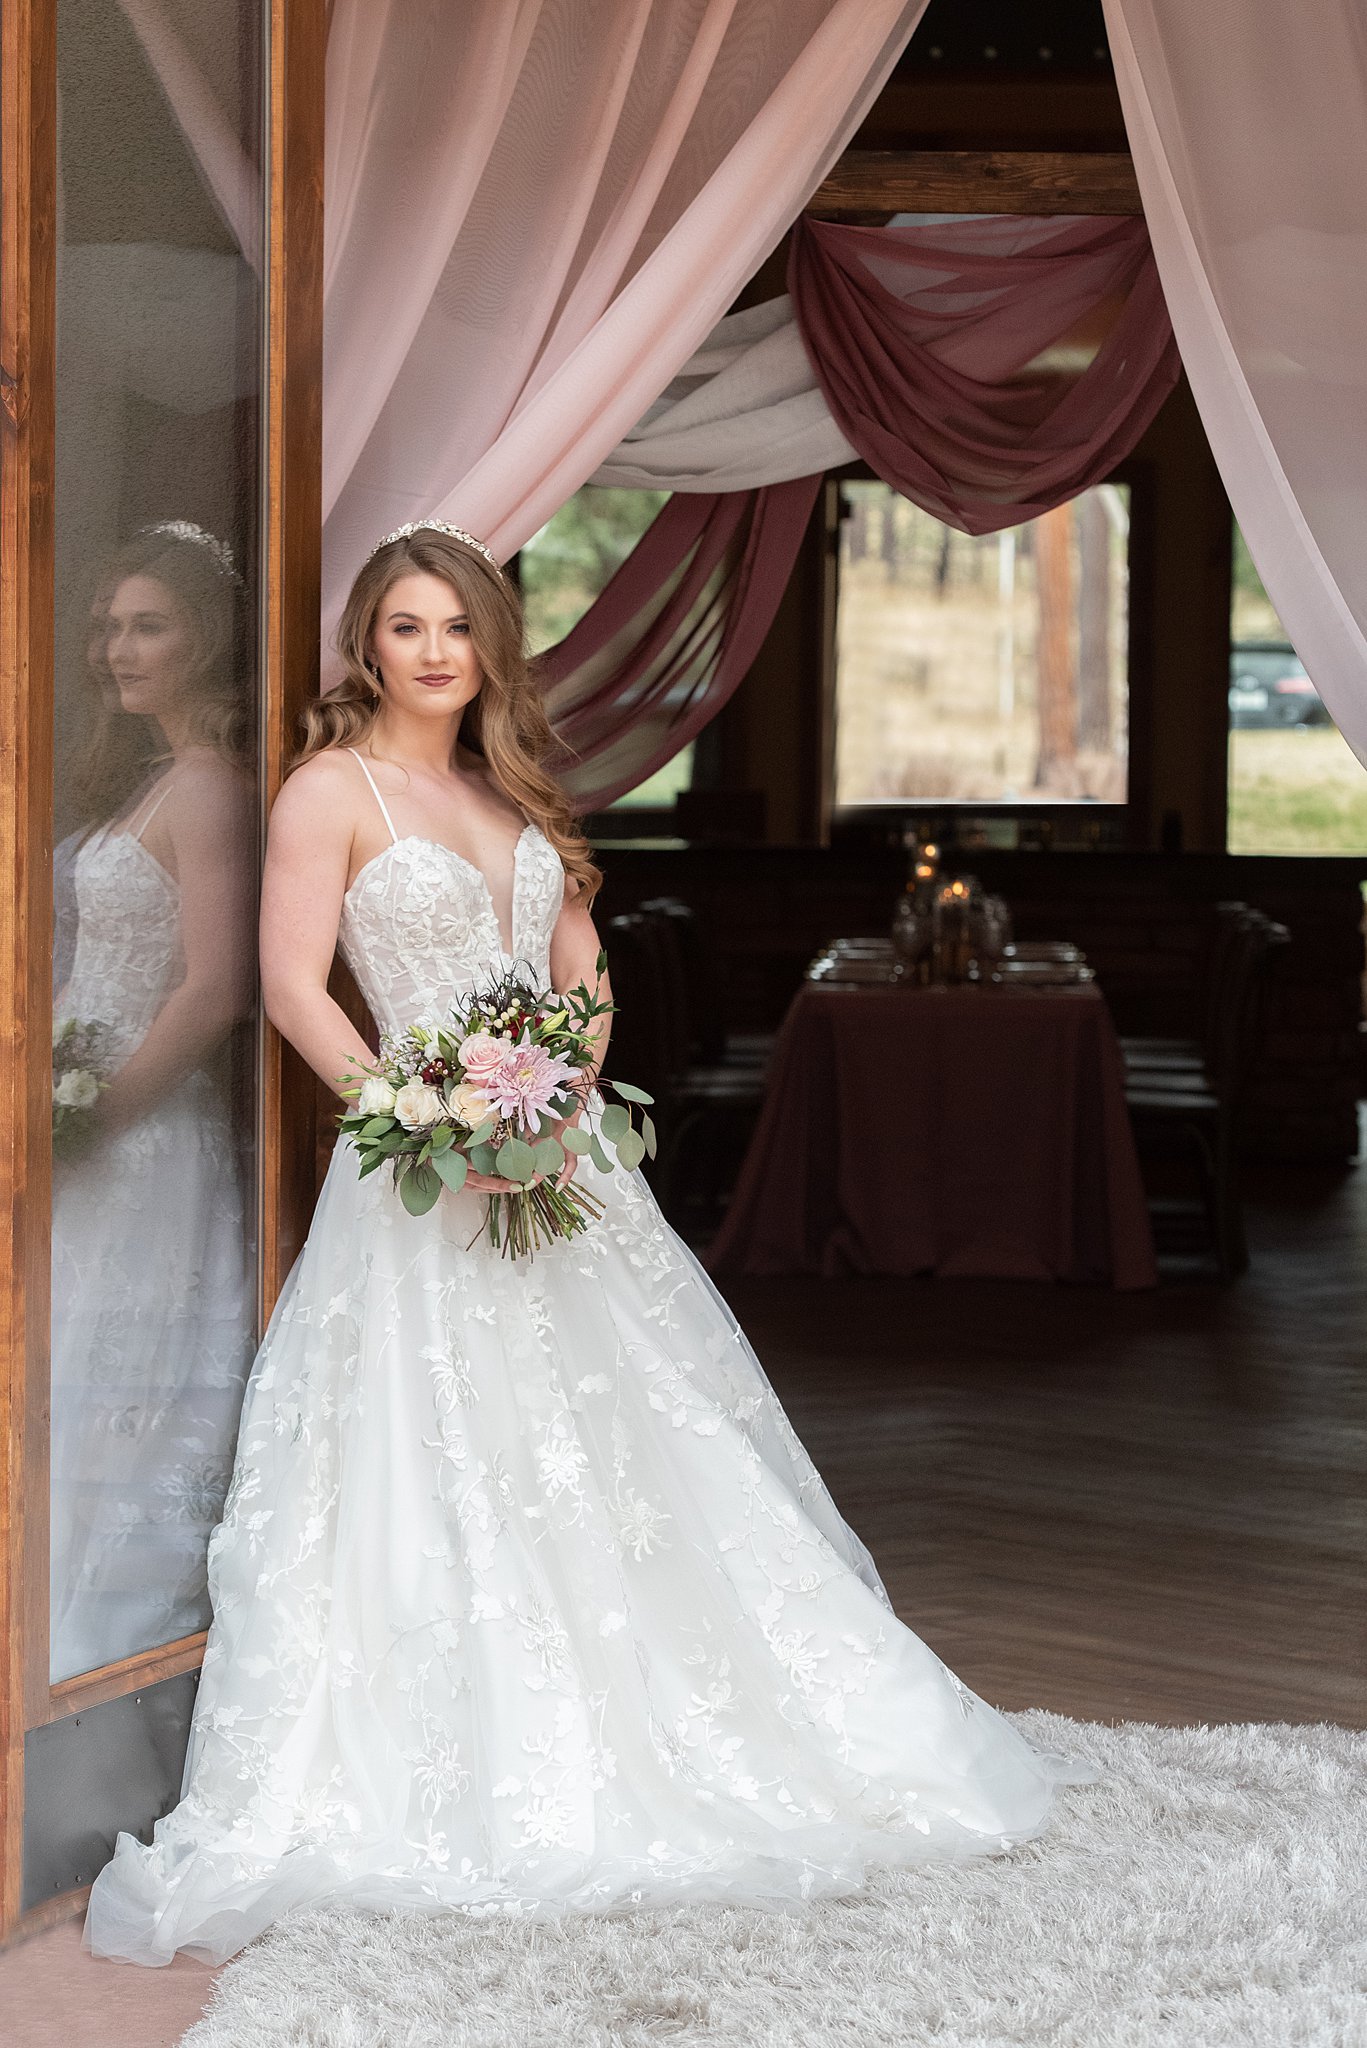 A bride stands in a doorway in a lace dress holding her bouquet